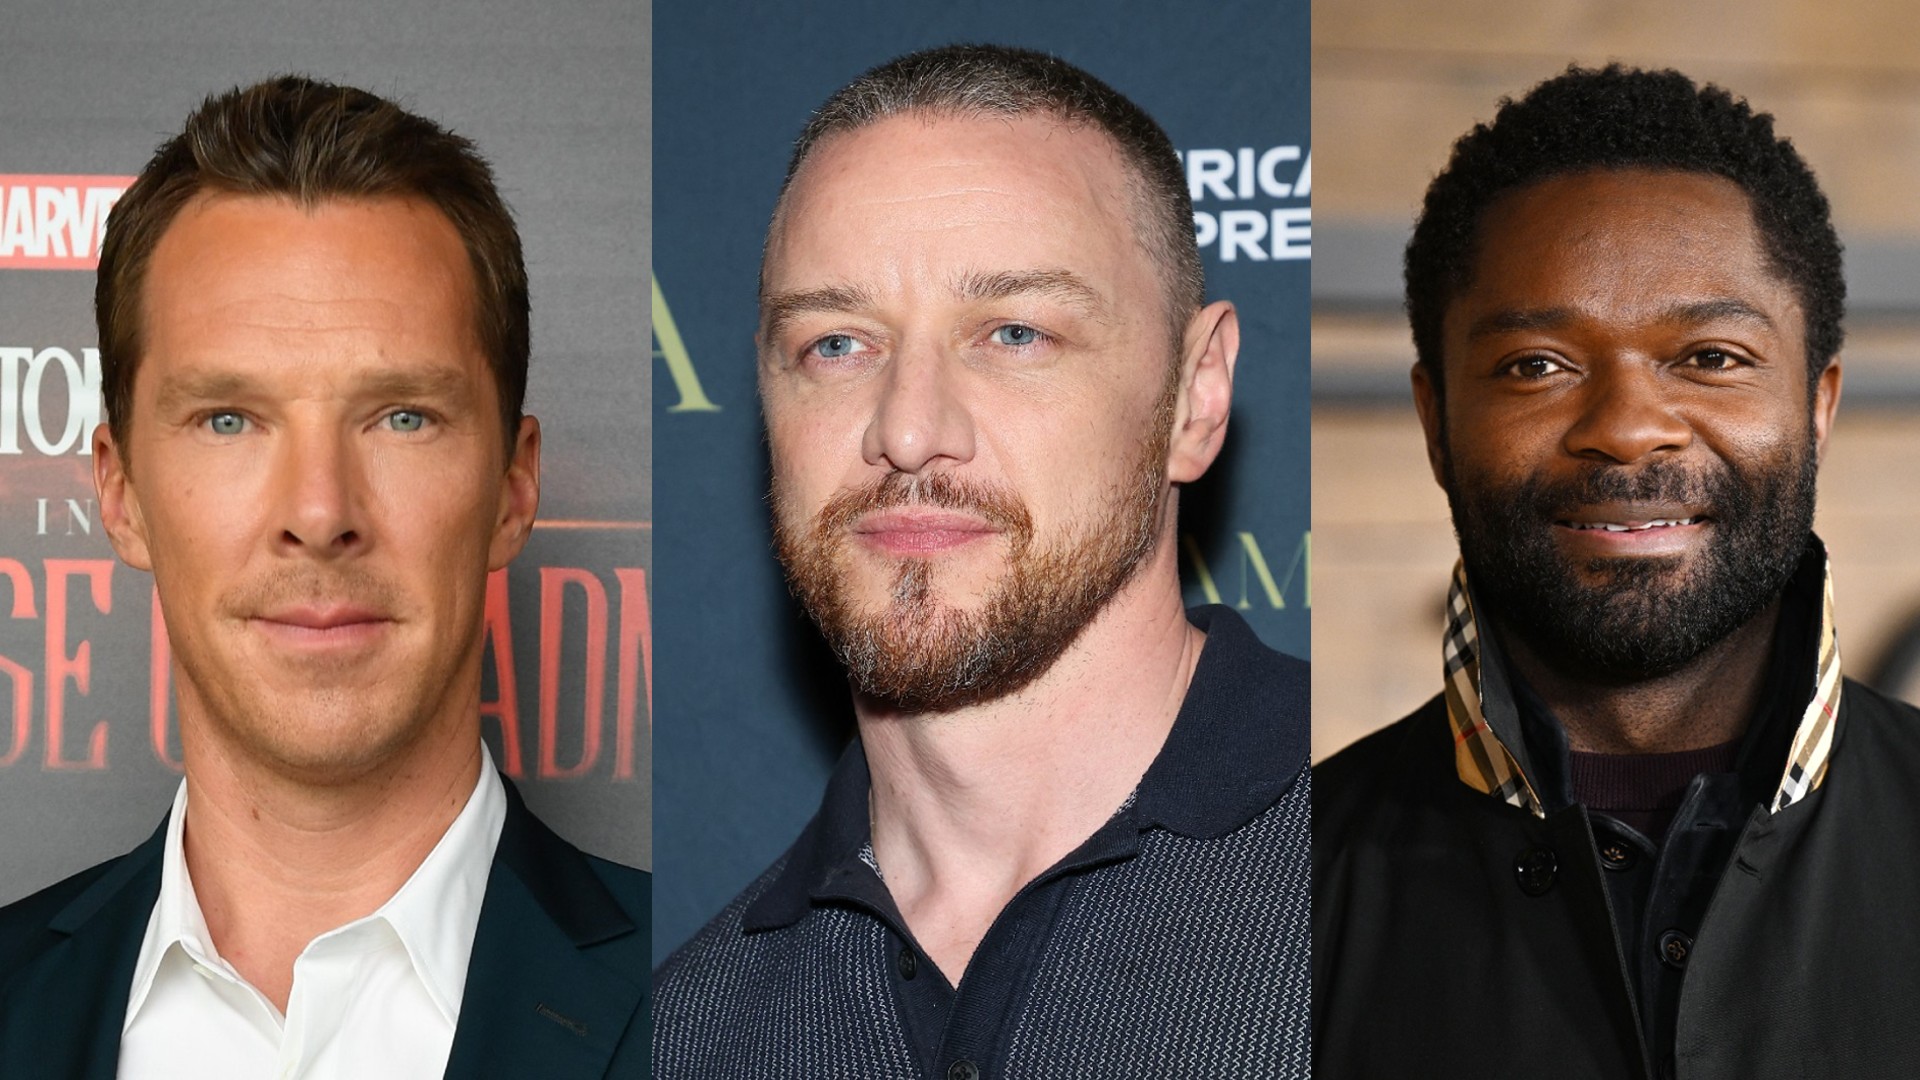  Casting News: Benedict Cumberbatch, James McAvoy, and David Oyelowo Join Biblical Film 'The Book of Clarence'